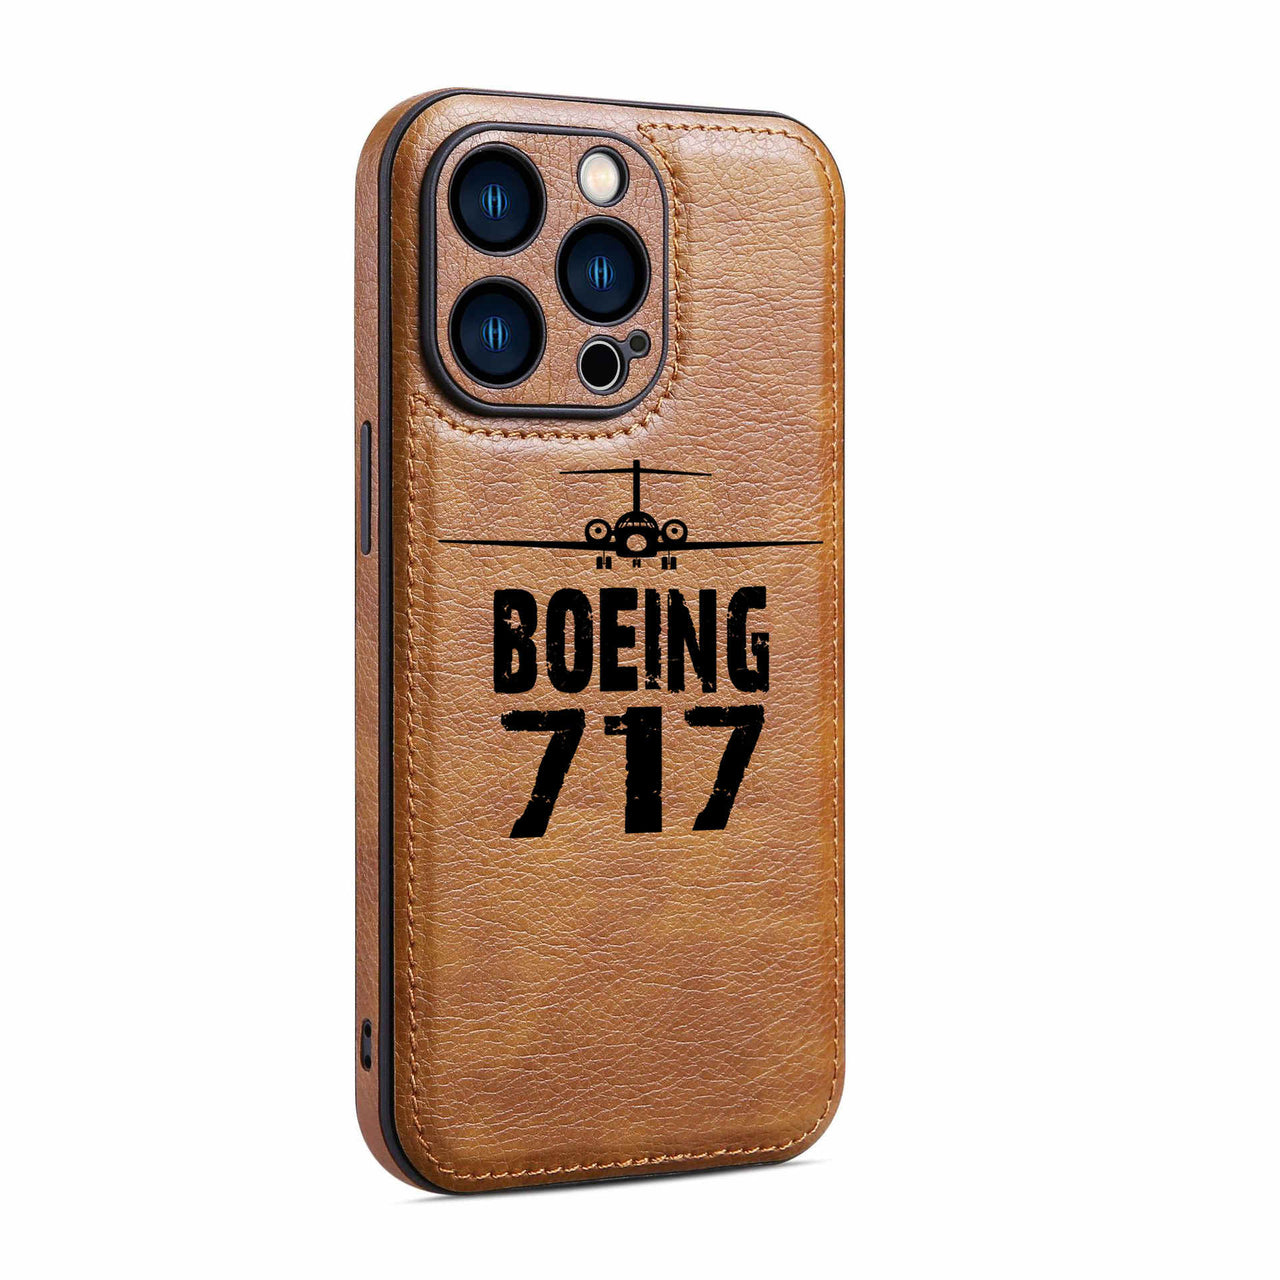 Boeing 717 & Plane Designed Leather iPhone Cases